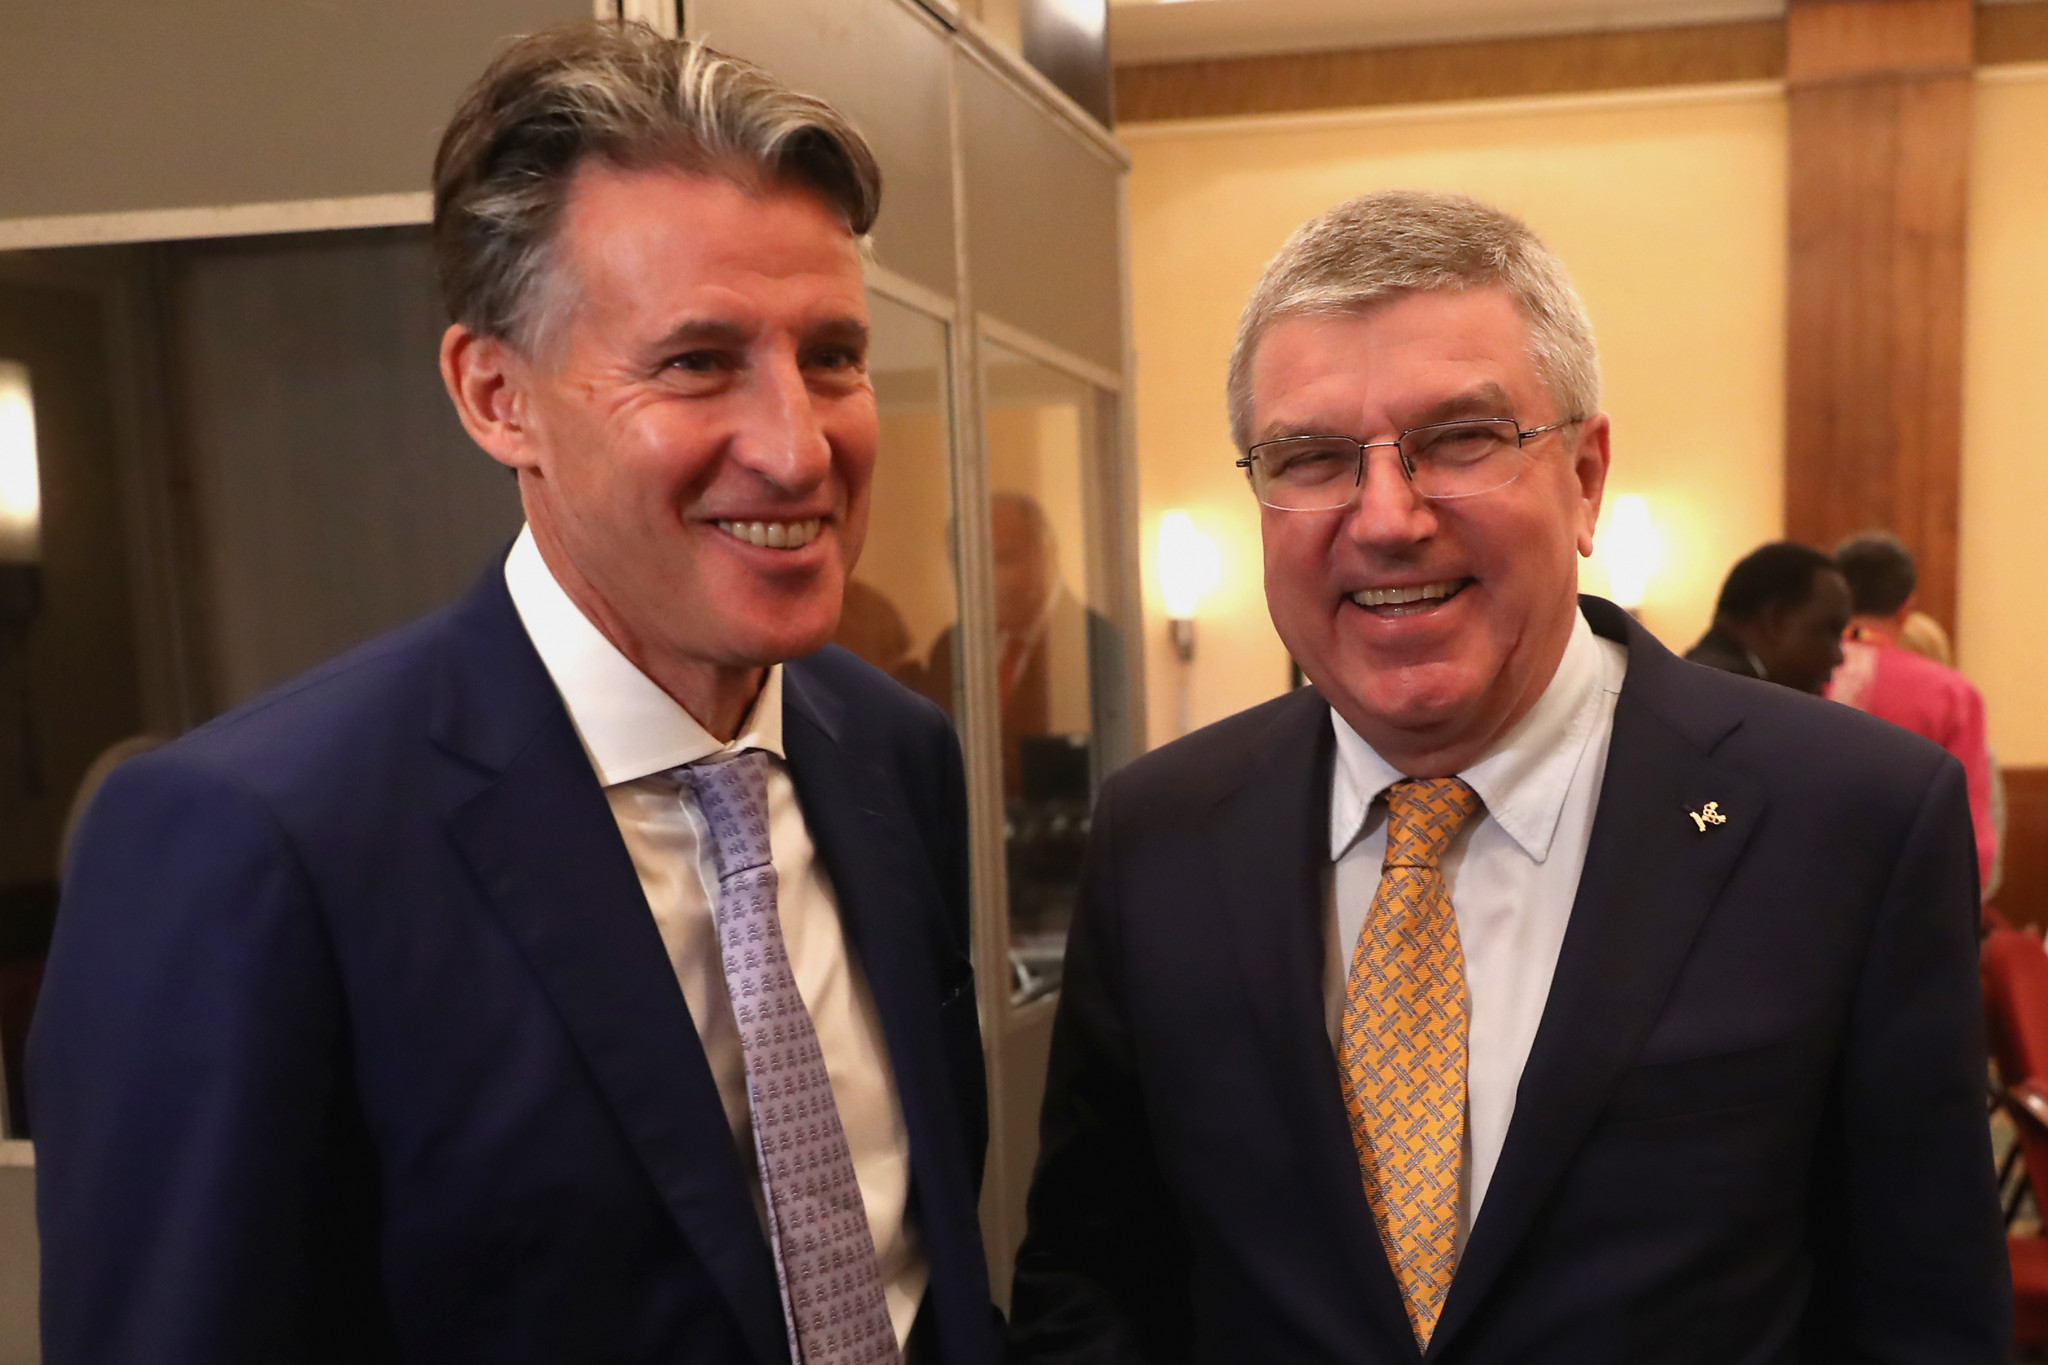 The relationship between Sebastian Coe, left and Thomas Bach, right is worth a keeping an eye on ©Getty Images